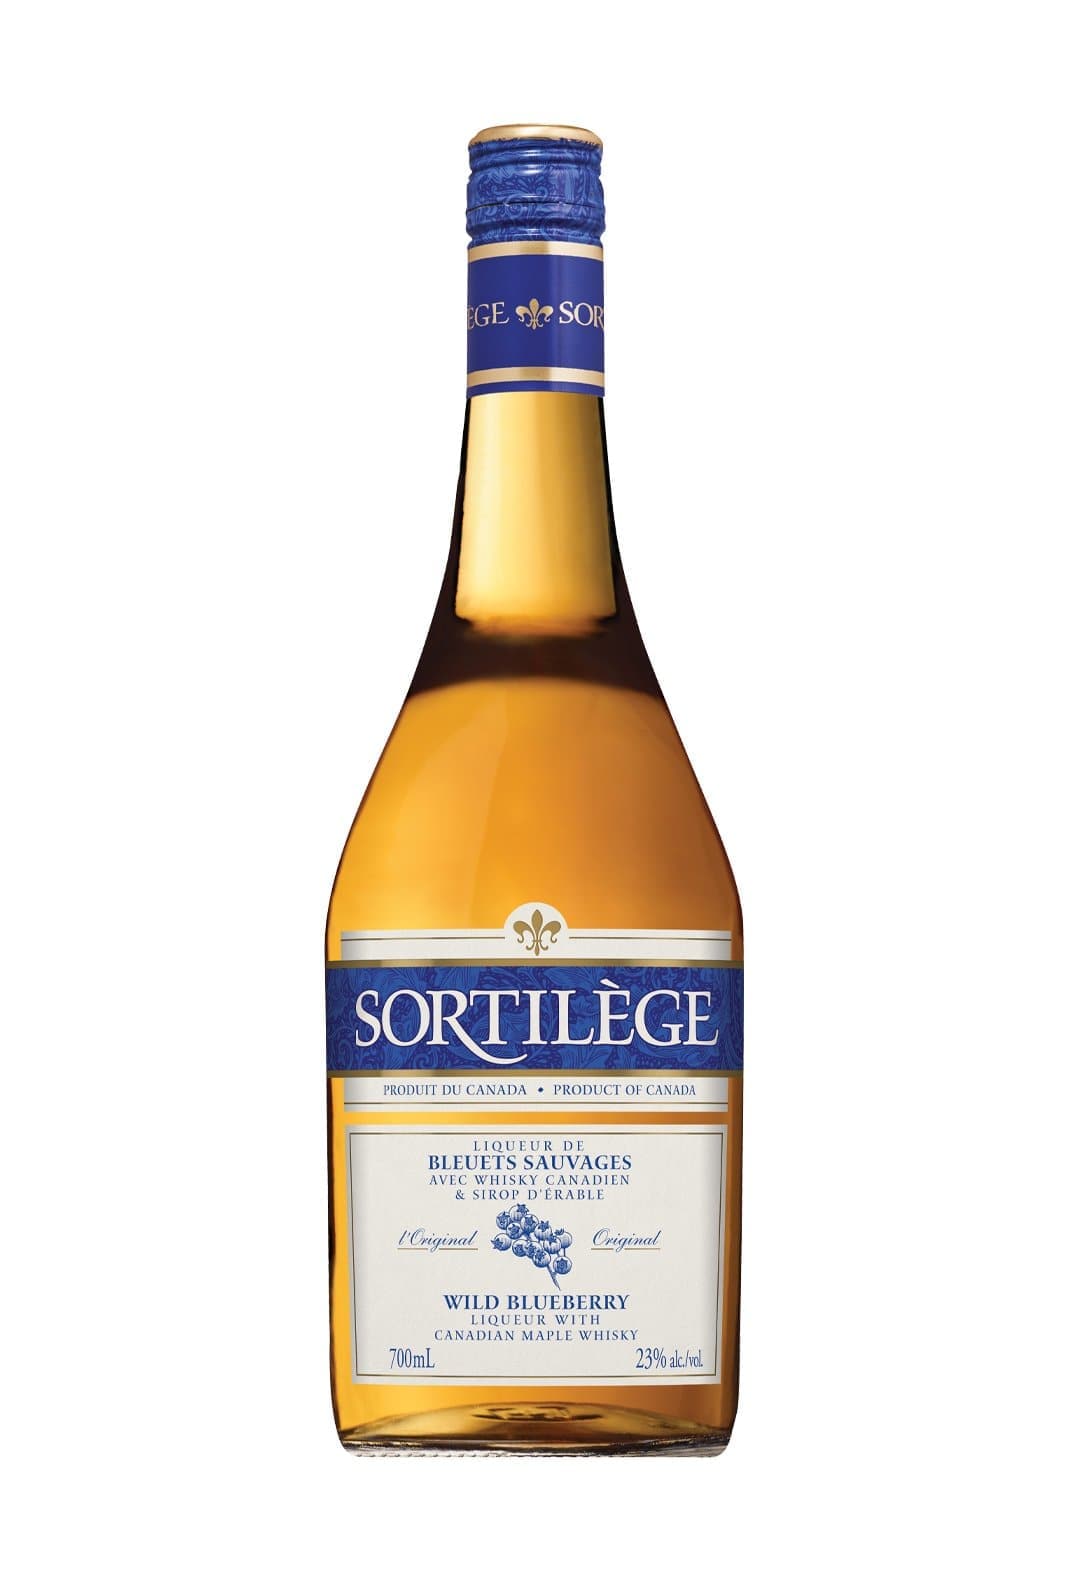 Sortilege Wild Blueberry Whisky Liqueur 23% 700ml | Whiskey | Shop online at Spirits of France